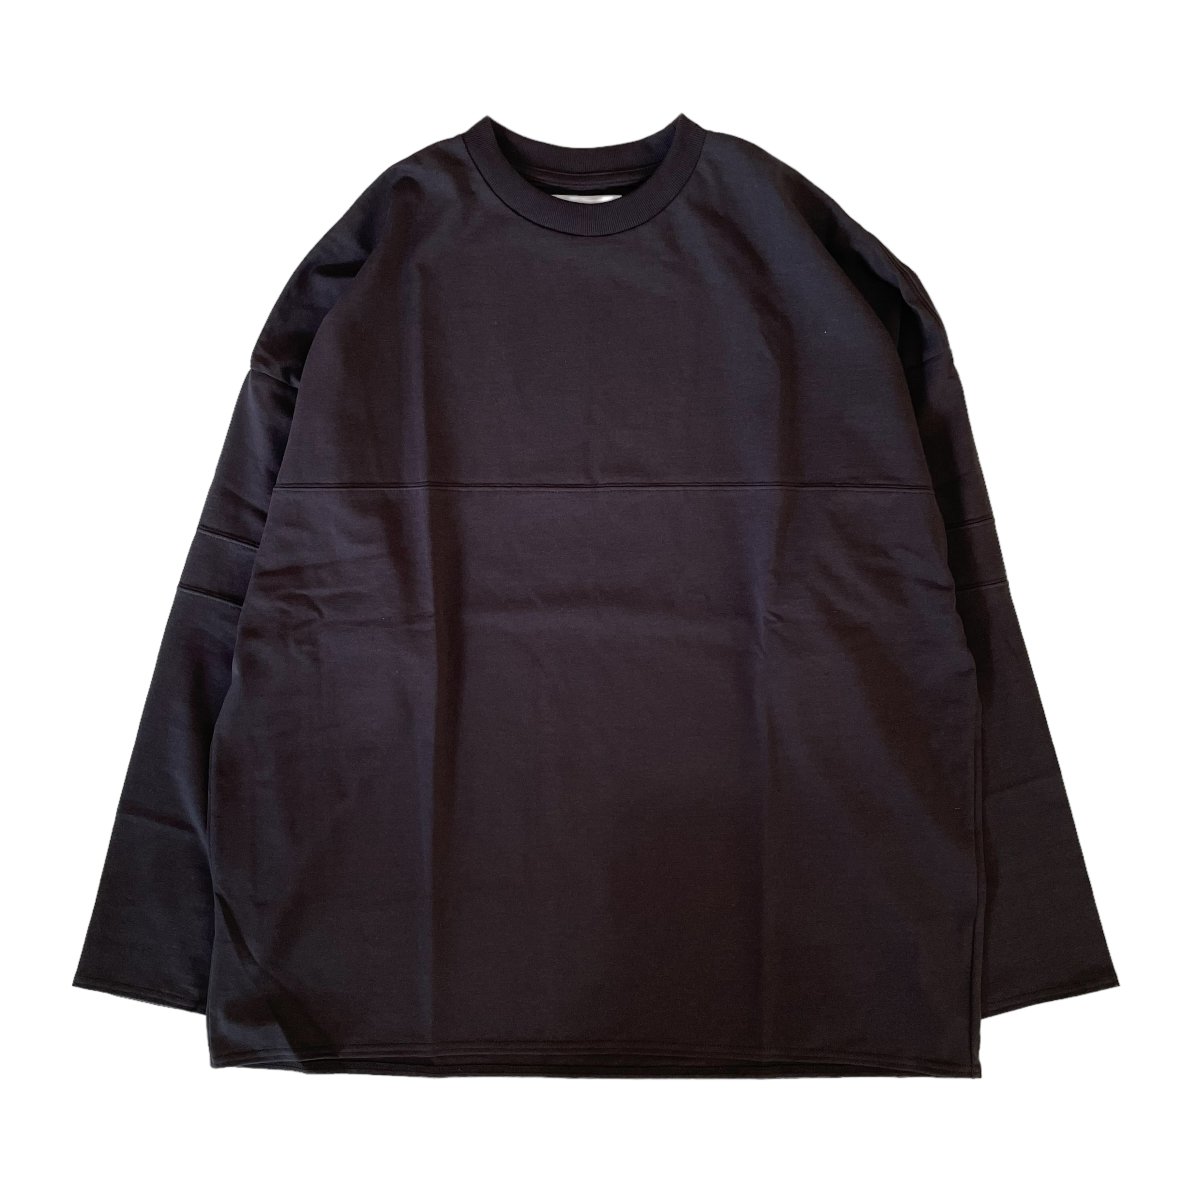 marka <BR> FOOTBALL TEE L/S - 14/ RECYCLE SUVIN ORGANIC COTTON KNIT -  (CHARCOAL)